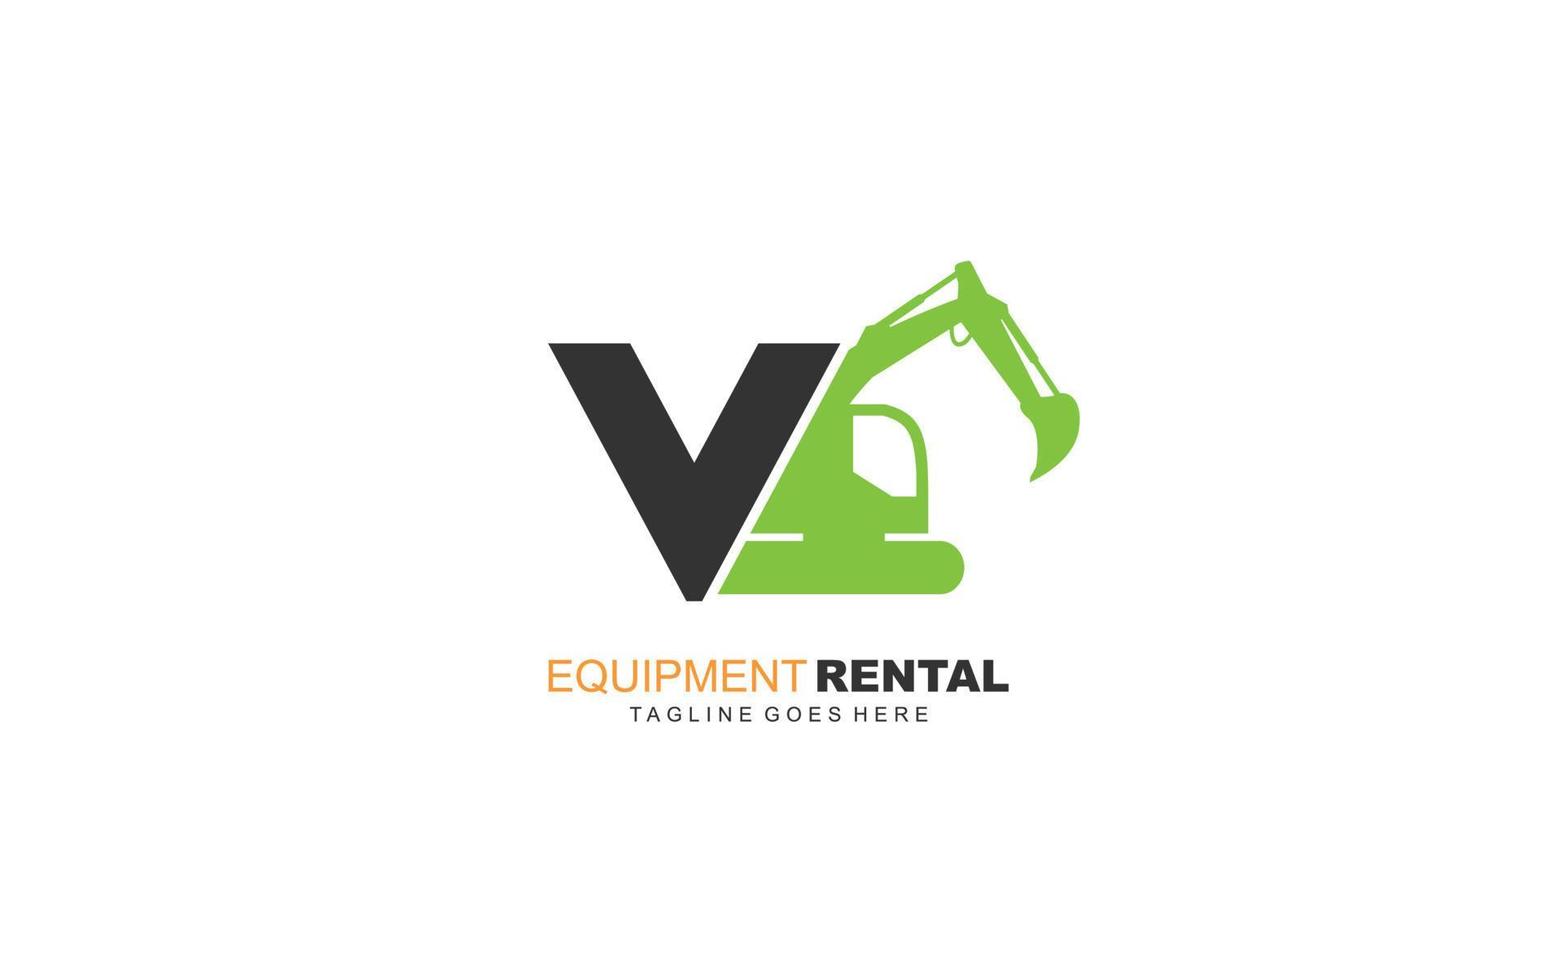 V logo excavator for construction company. Heavy equipment template vector illustration for your brand.